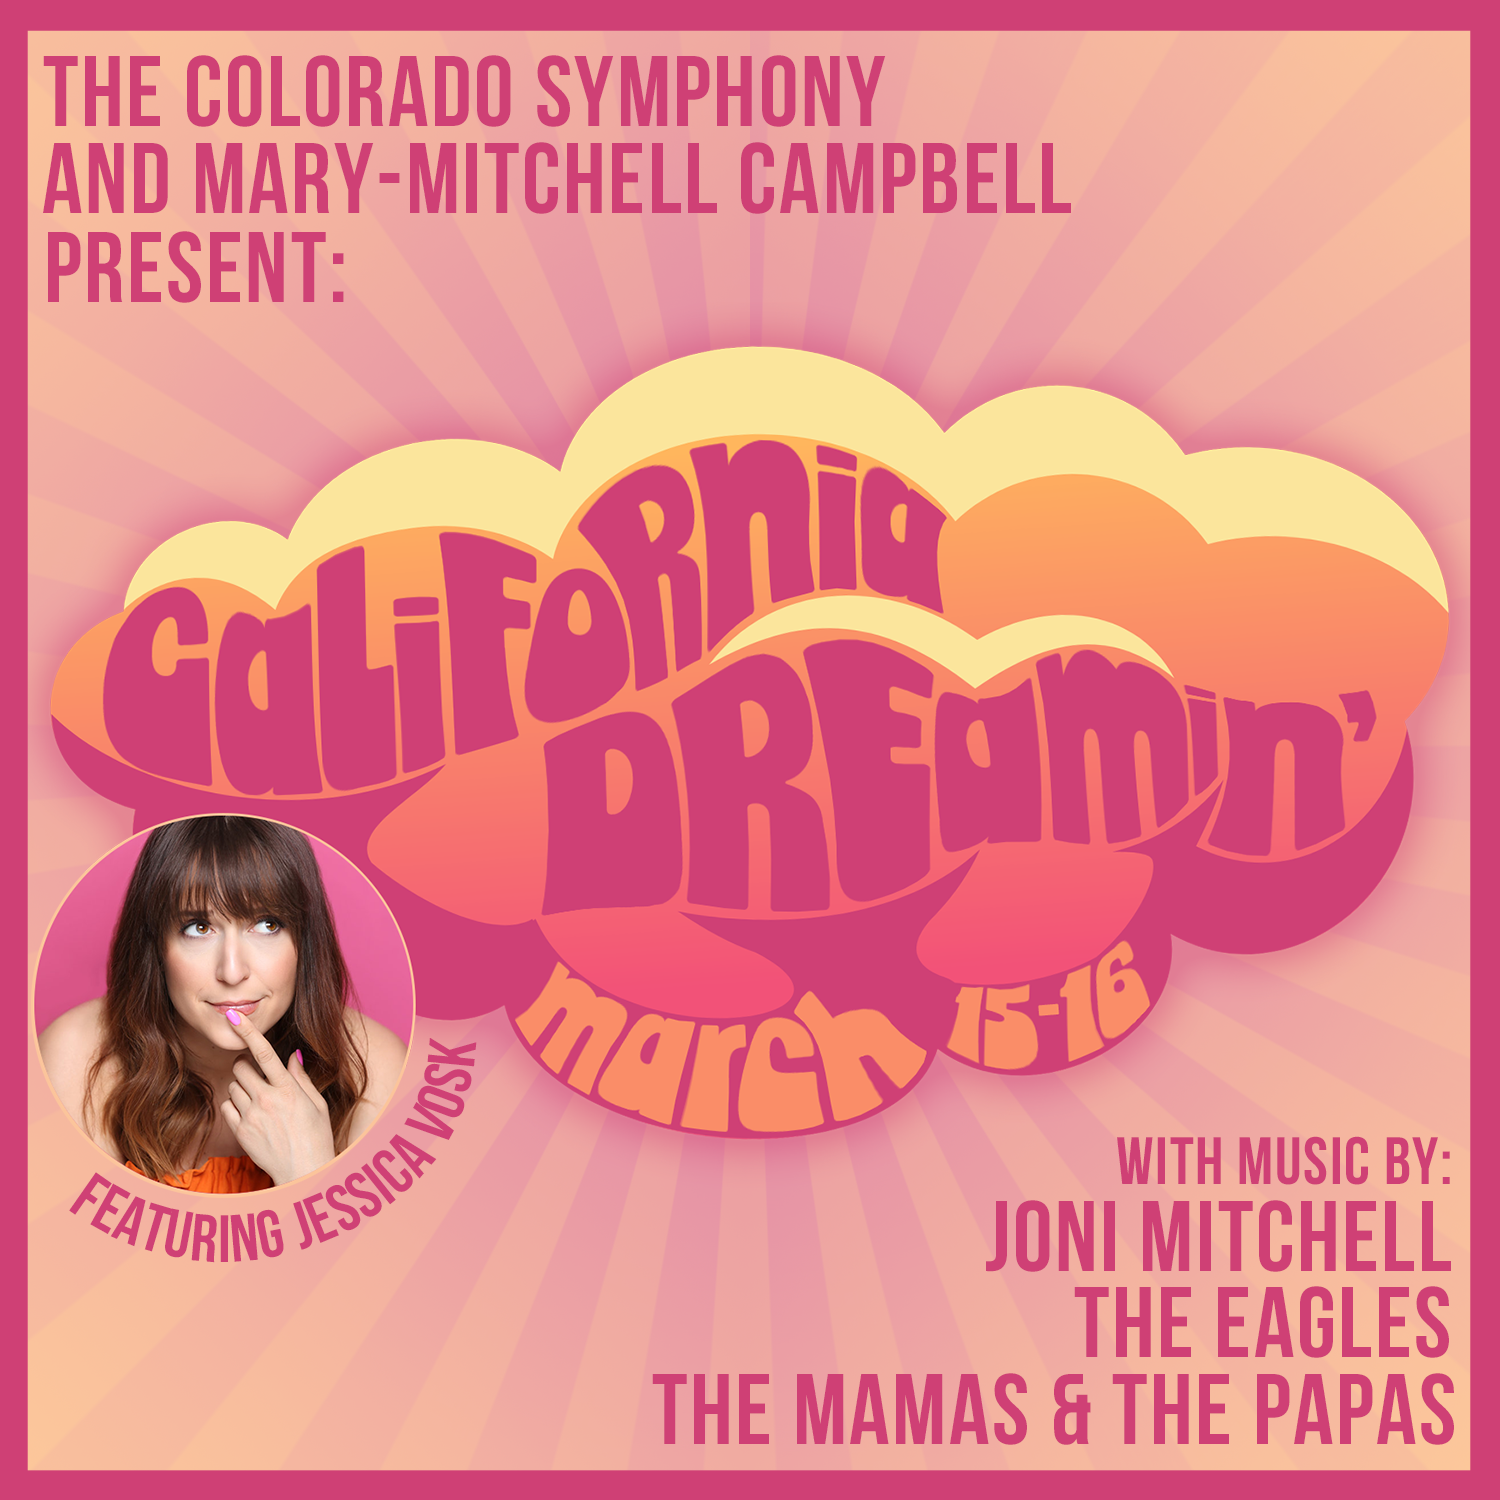 More Info for California Dreamin': The Music of Laurel Canyon with Mary-Mitchell Campbell and the Colorado Symphony